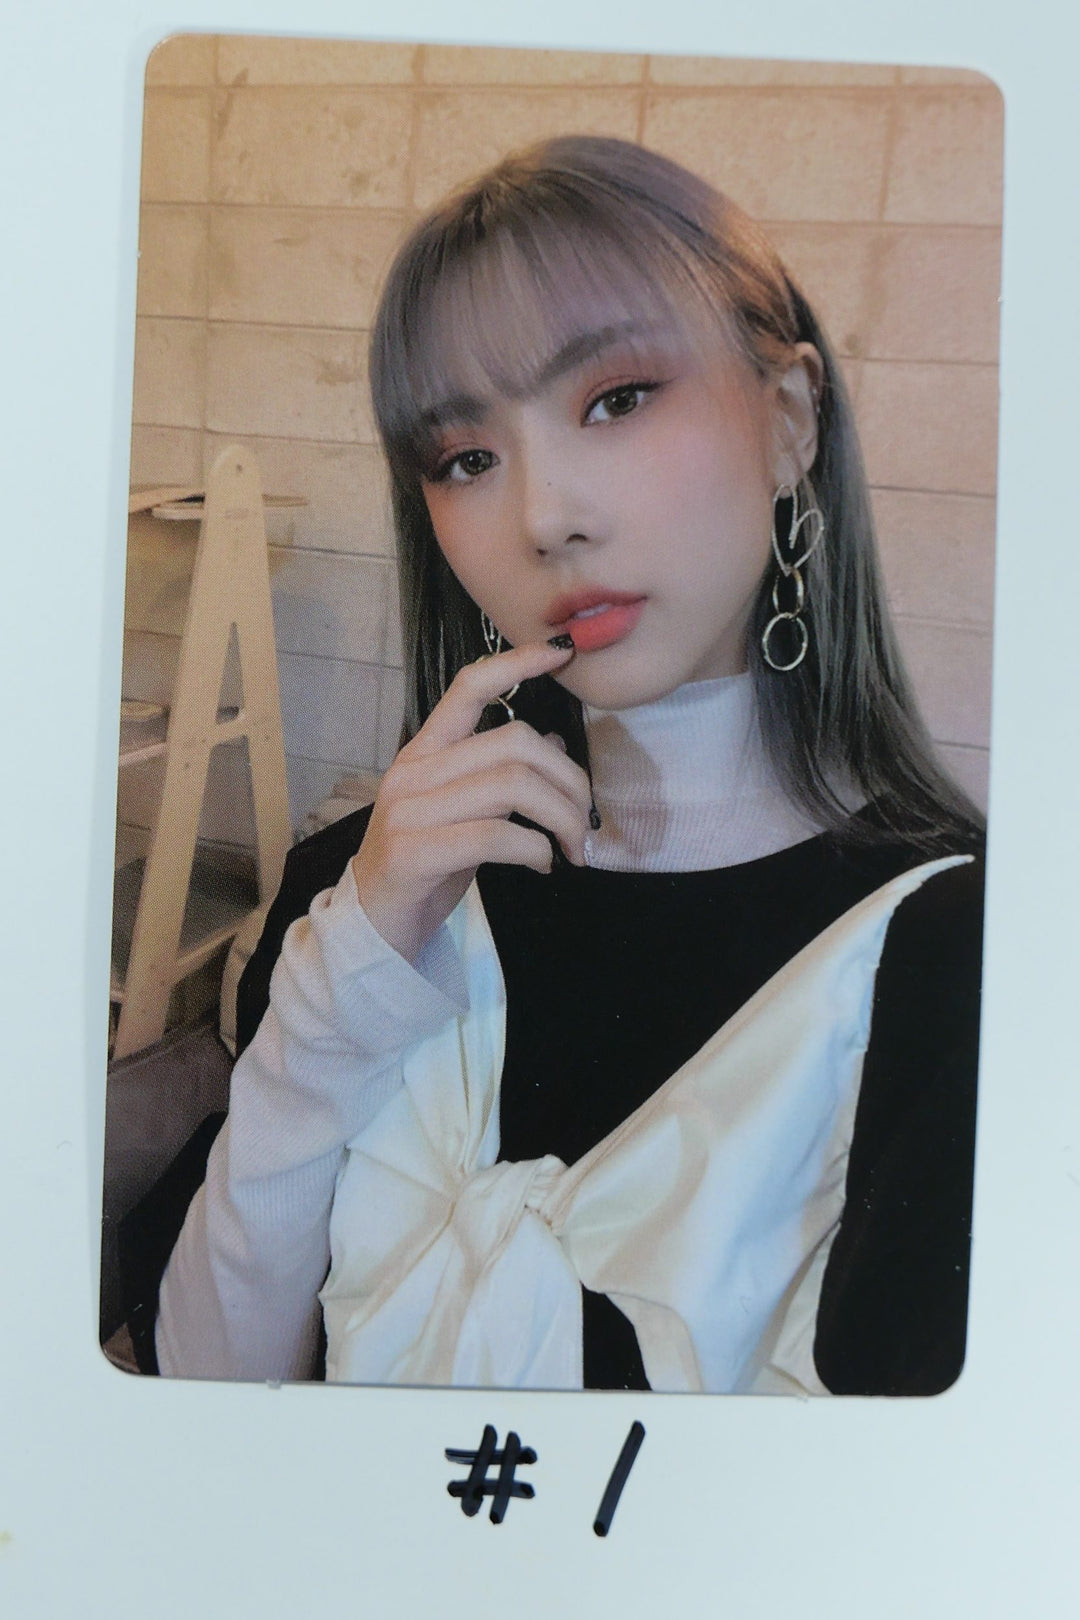 Dreamcatcher "Road To Utopia" - Yoohyeon Official Photocard